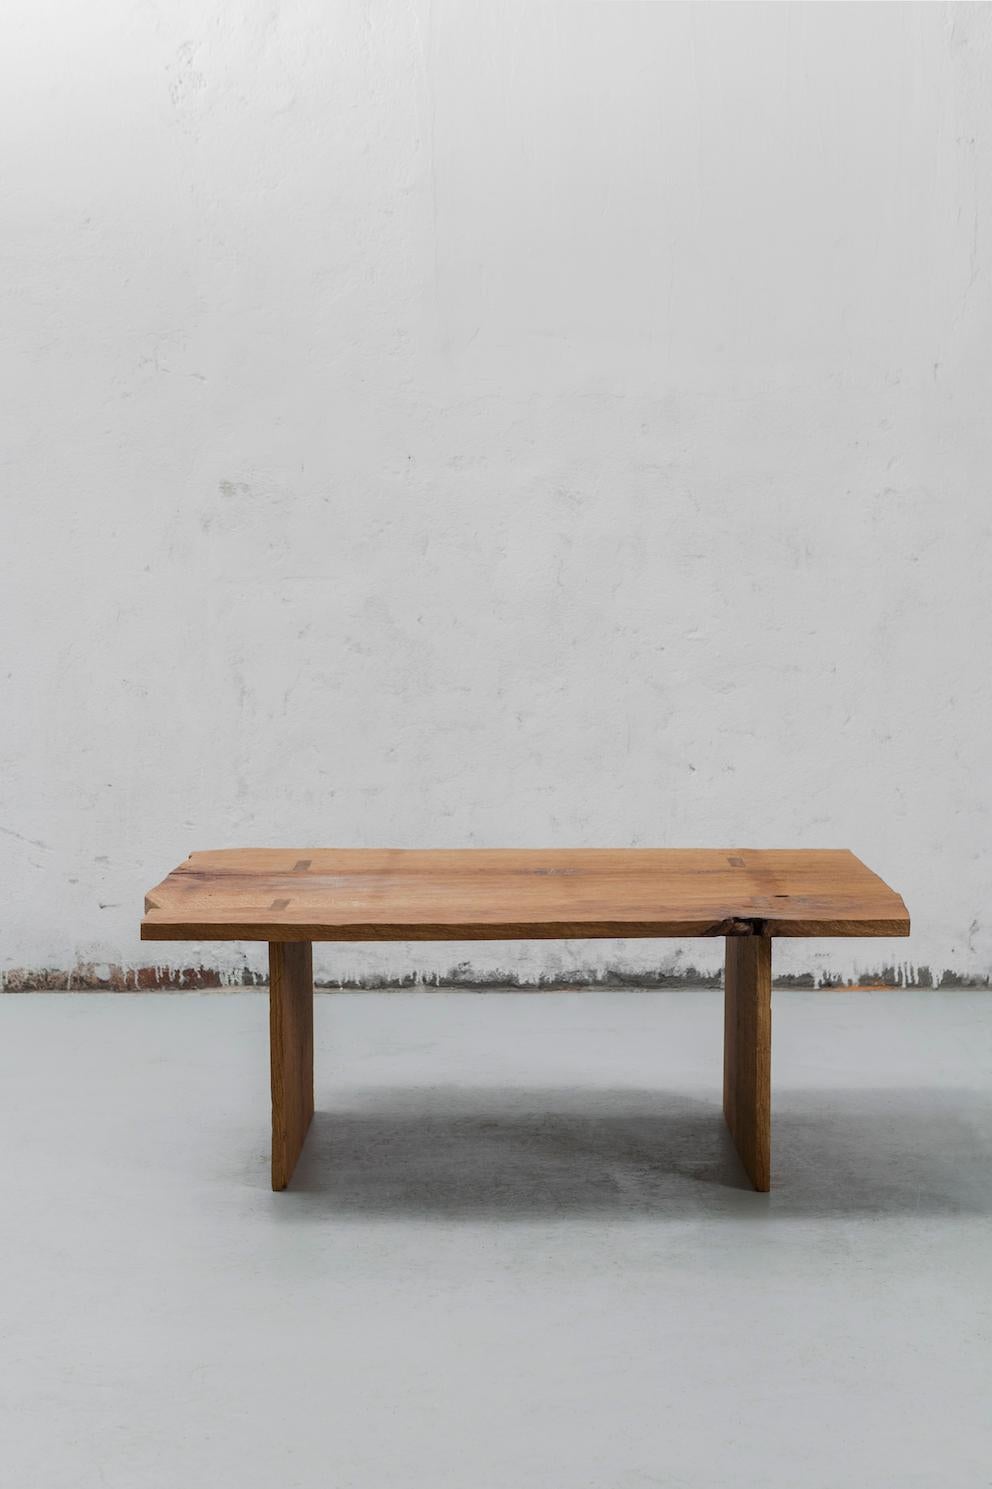 Coffee table of solid oak (+ linseed oil)
(Outdoor use OK)

SÓHA design studio conceives and produces furniture design and decorative objects in solid oak in an authentic style. Inspiration to create all these items comes from the Russian North